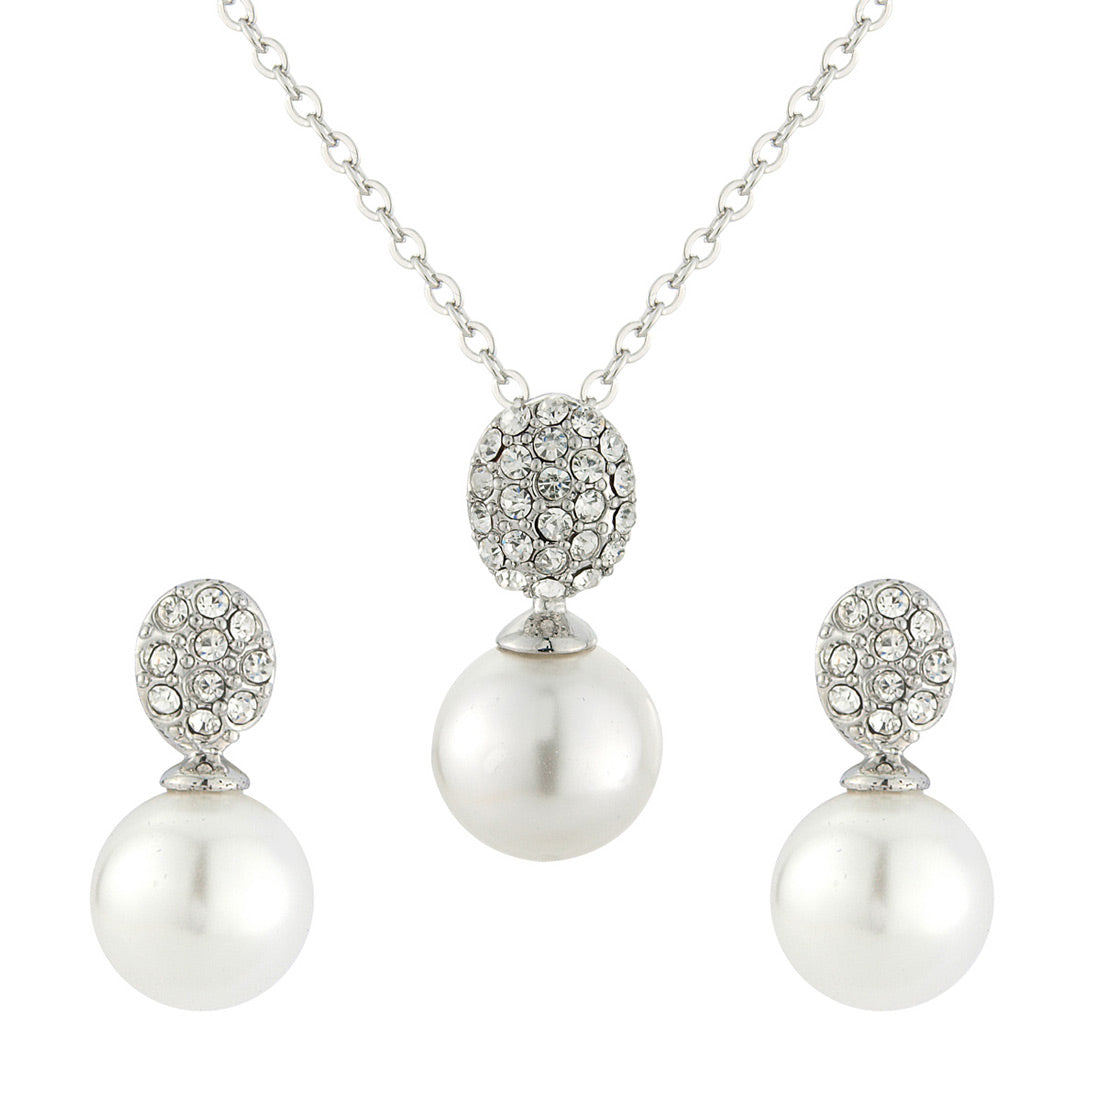 Timeless Elegance Pearl Bridal Jewellery Set featuring earrings and pendant